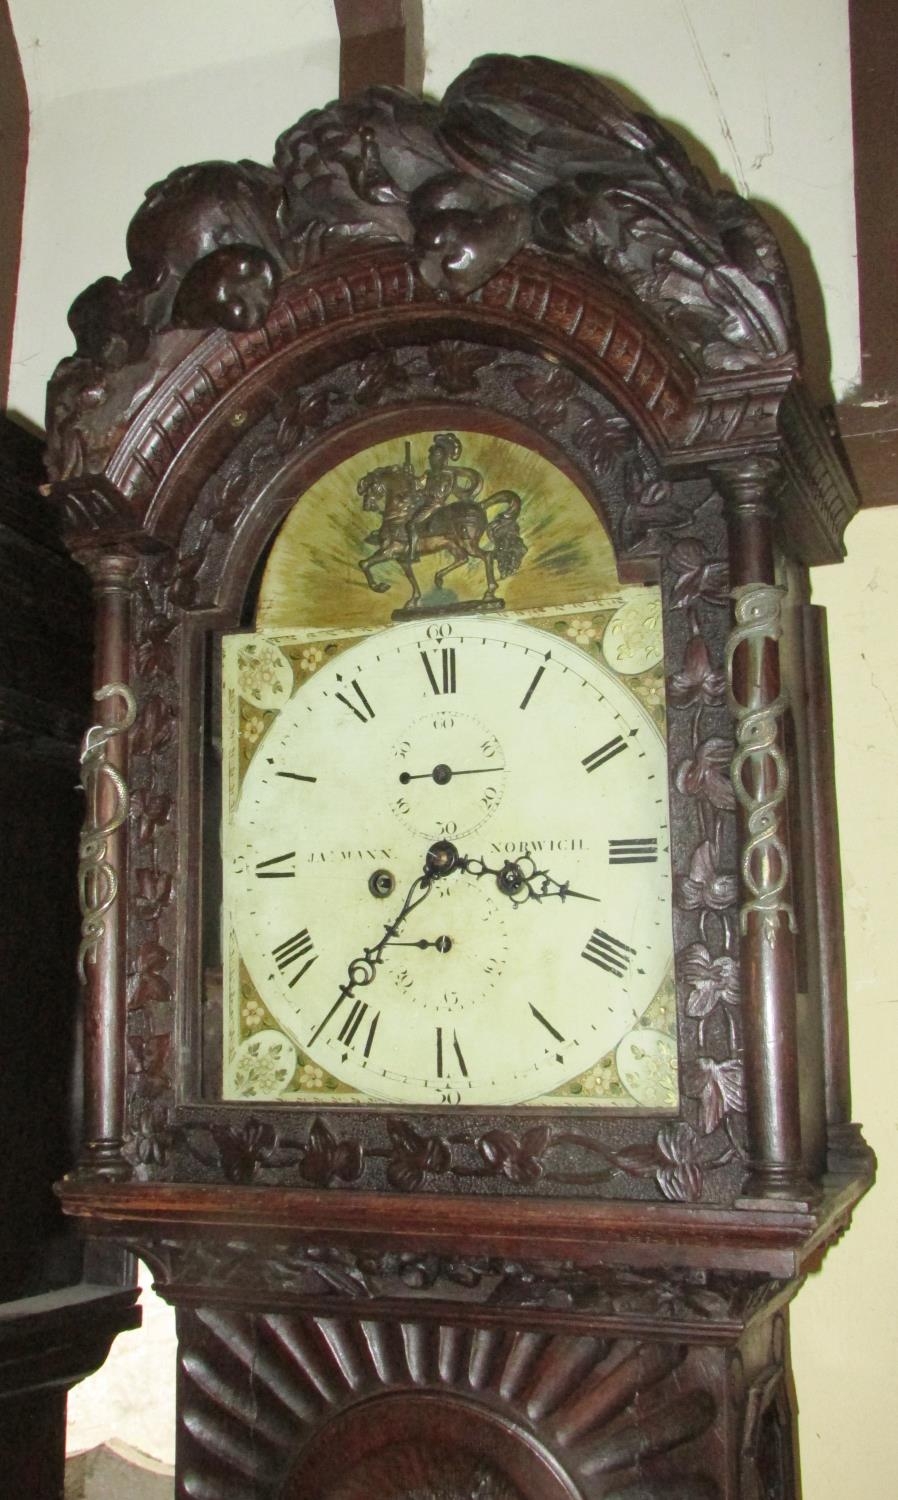 A 19th century oak longcase clock with heavy estate carving, the trunk detailing a knight fighting - Image 17 of 17